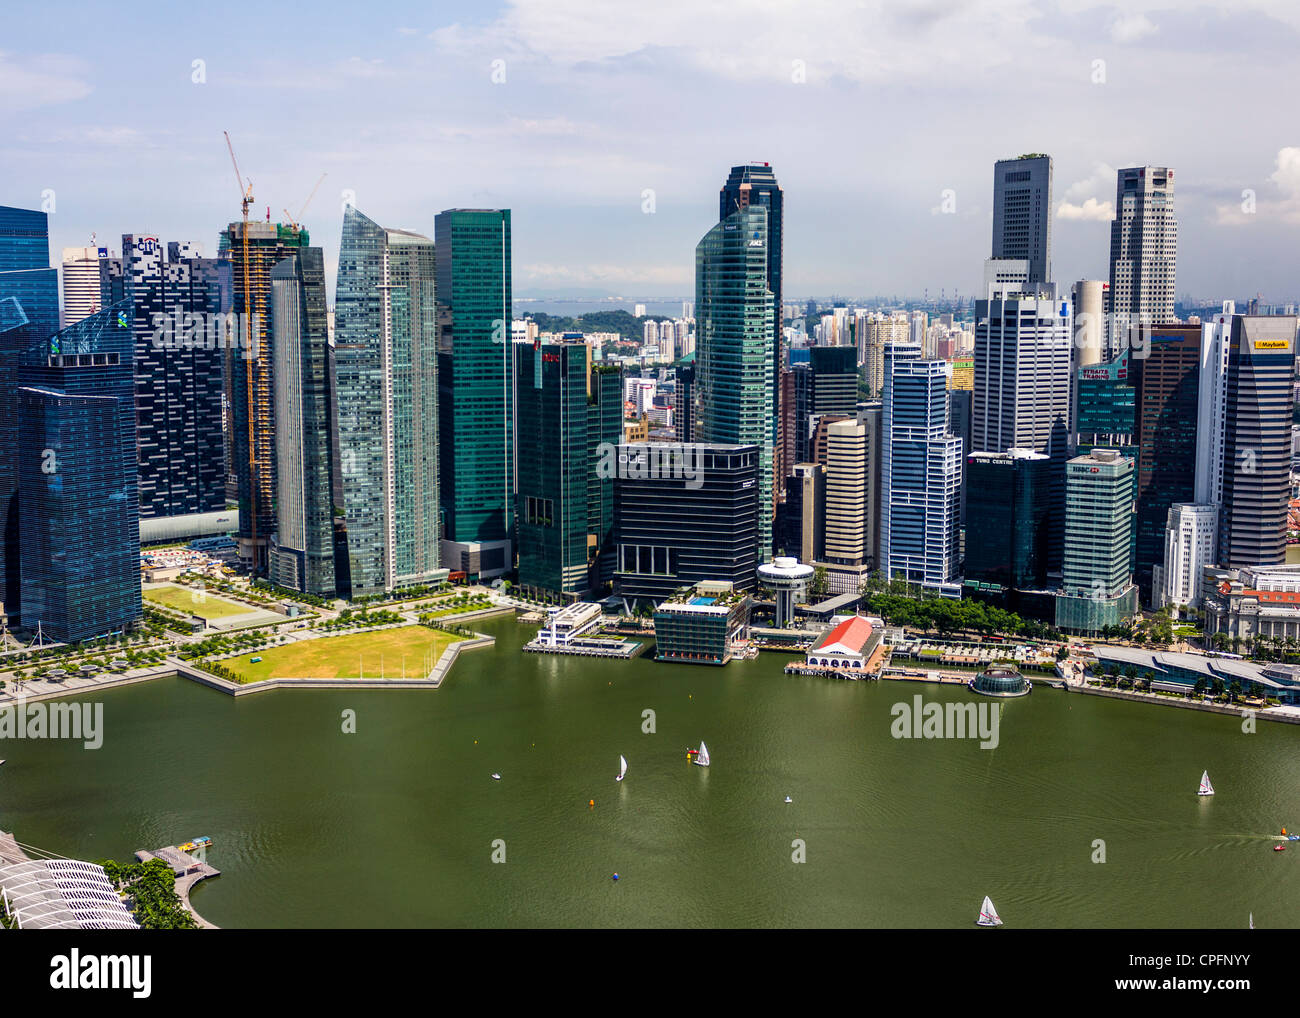 Views from Sky Park in Marina Bay Sands, Singapore. A modern shopping, hotel and casino complex. Stock Photo